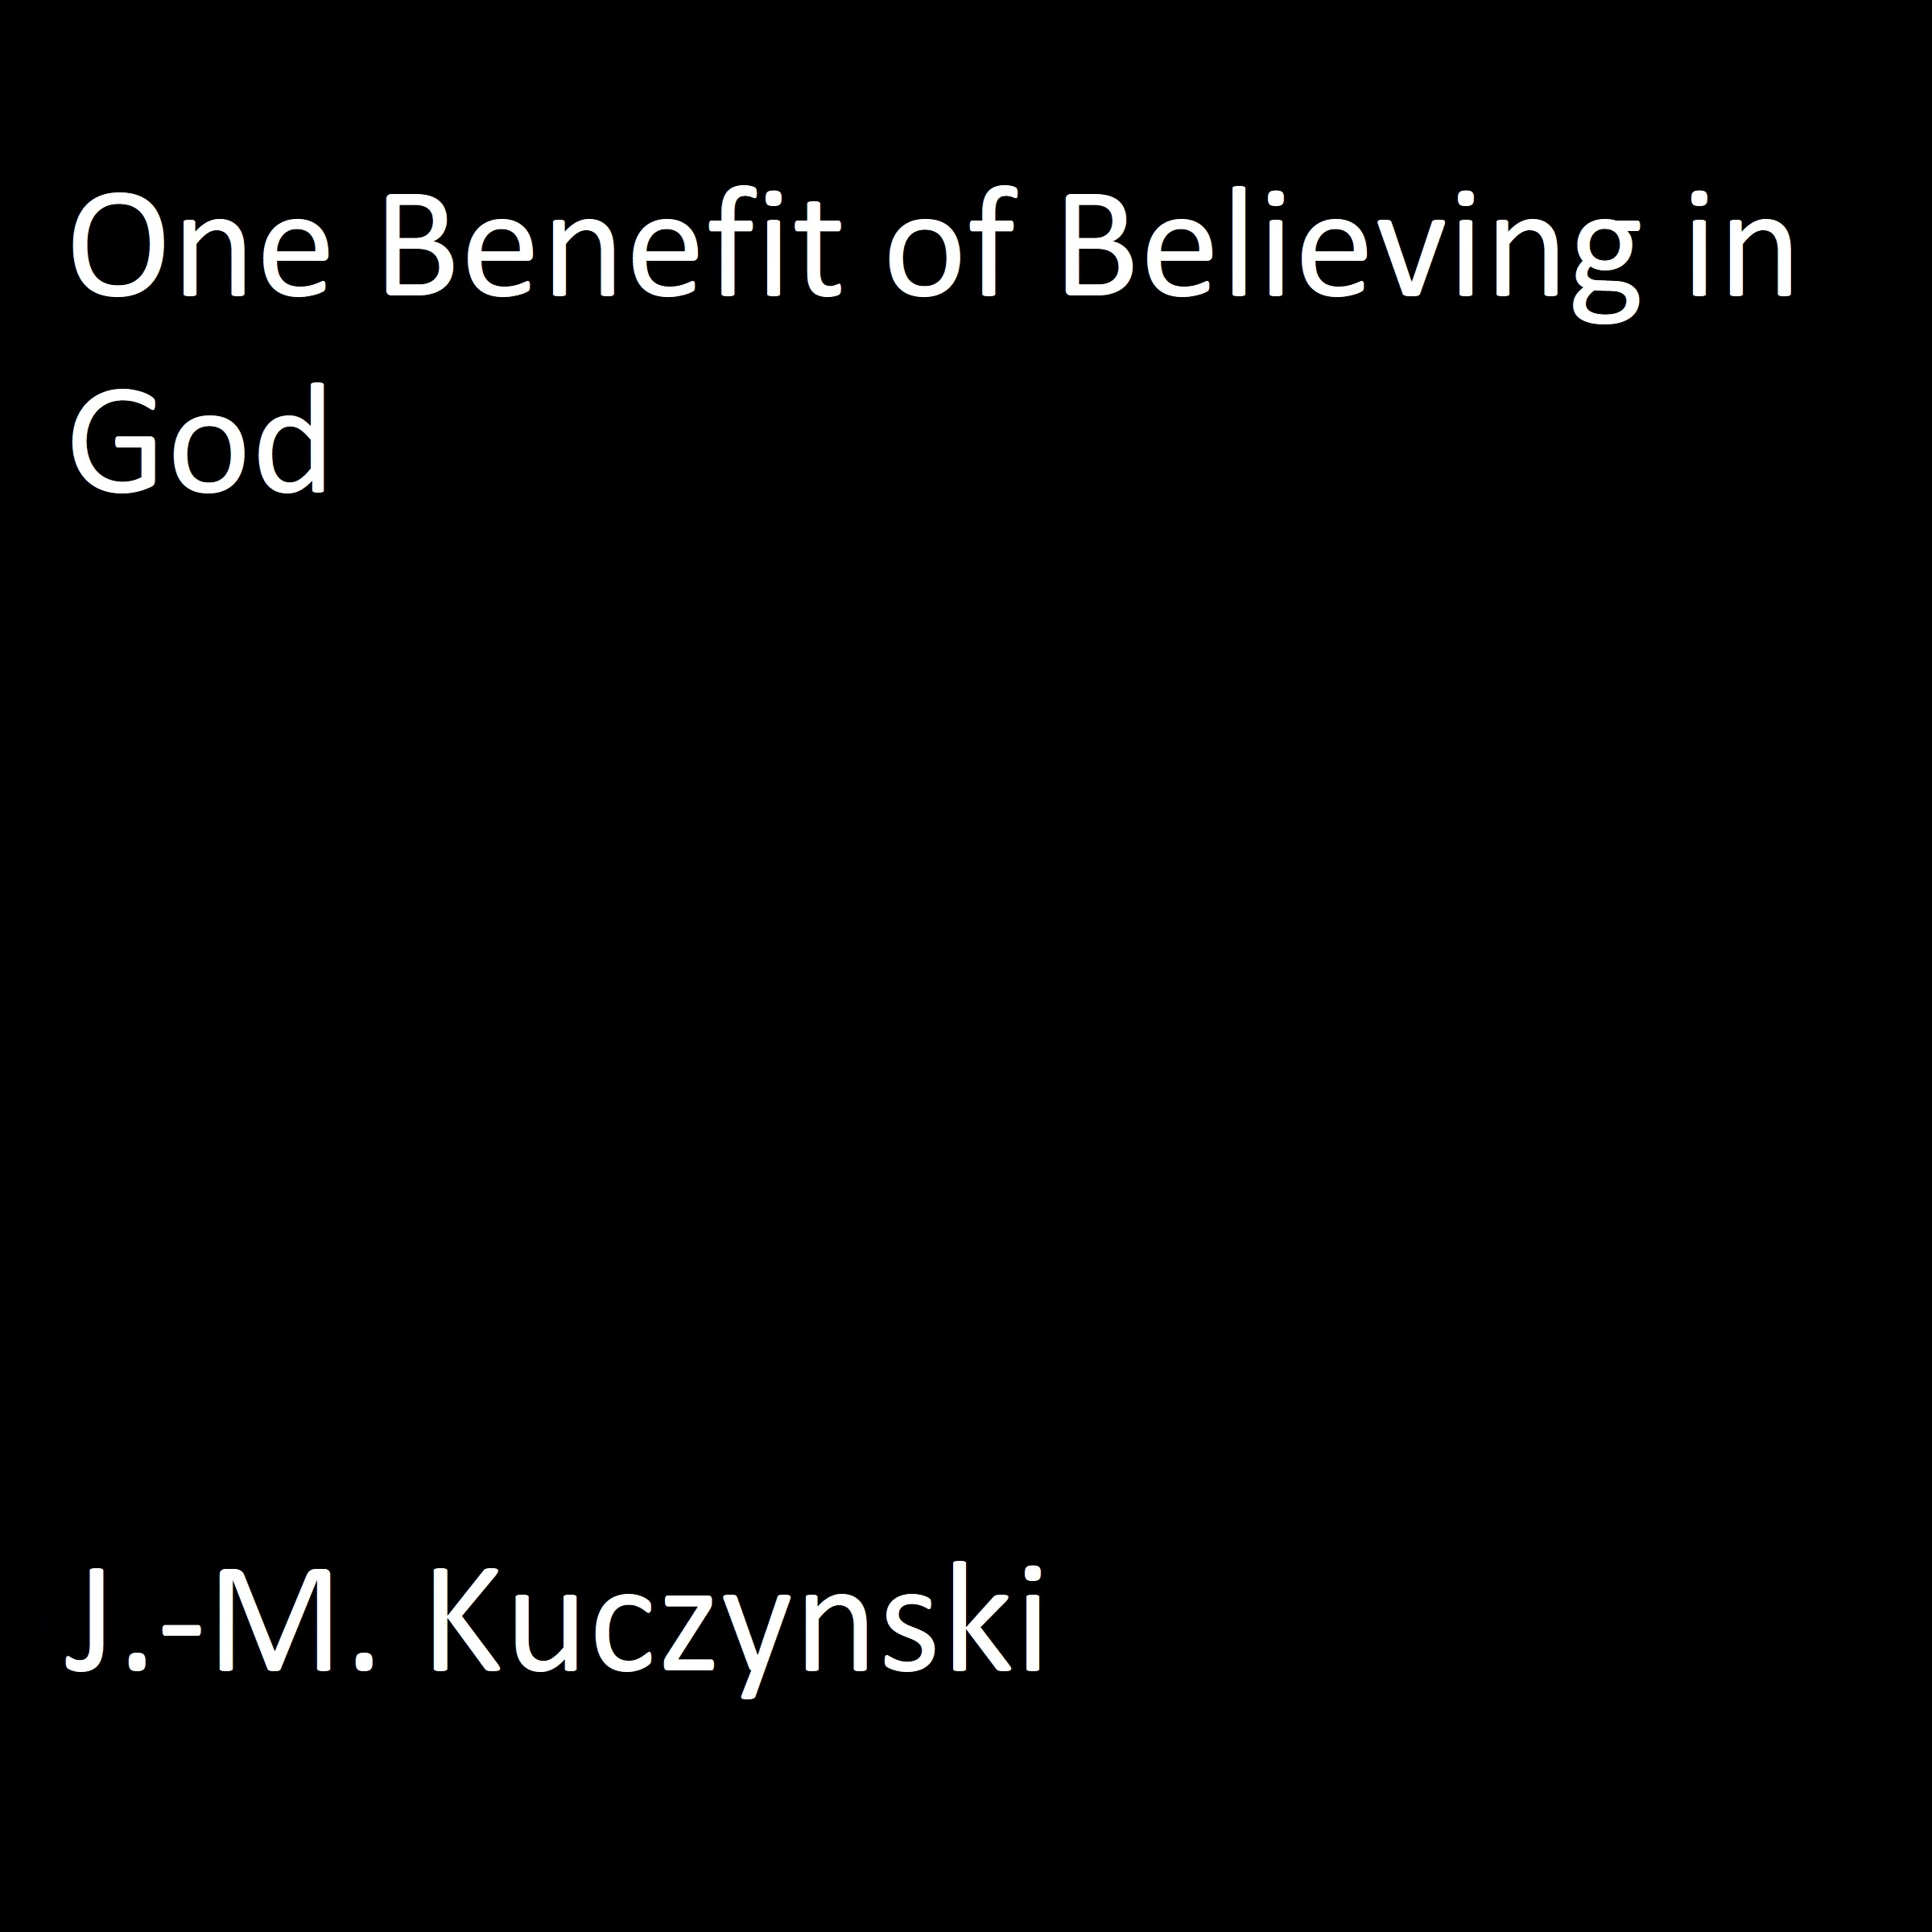 One Benefit of Believing in God Audiobook by J.-M. Kuczynski